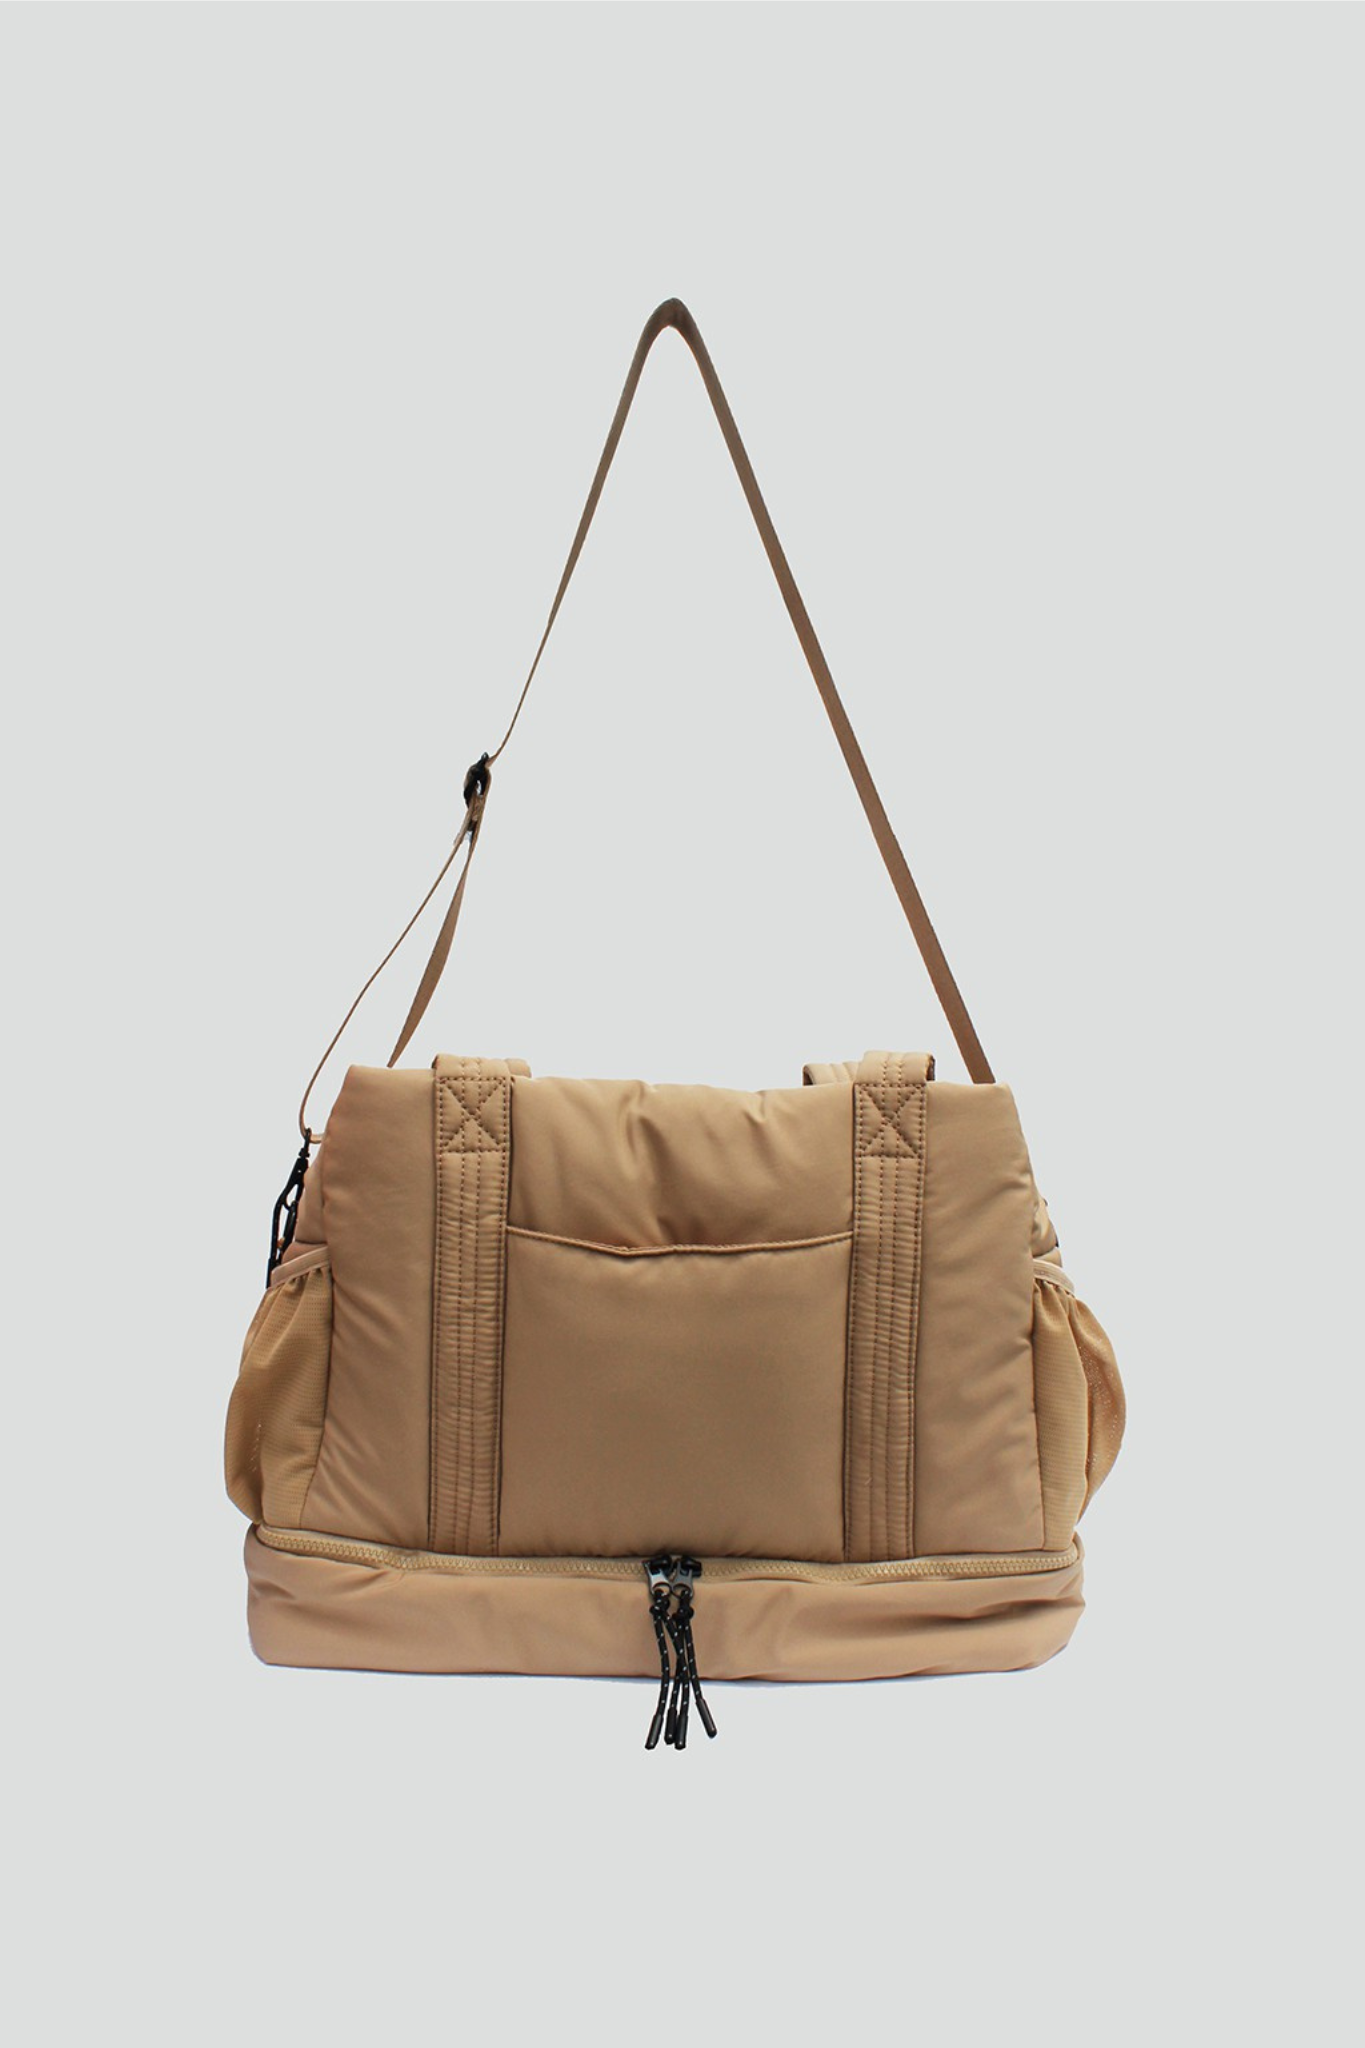 View 3 of Brooke Puffy Overnight Bag in Sand, a Bags from Larrea Cove. Detail: .